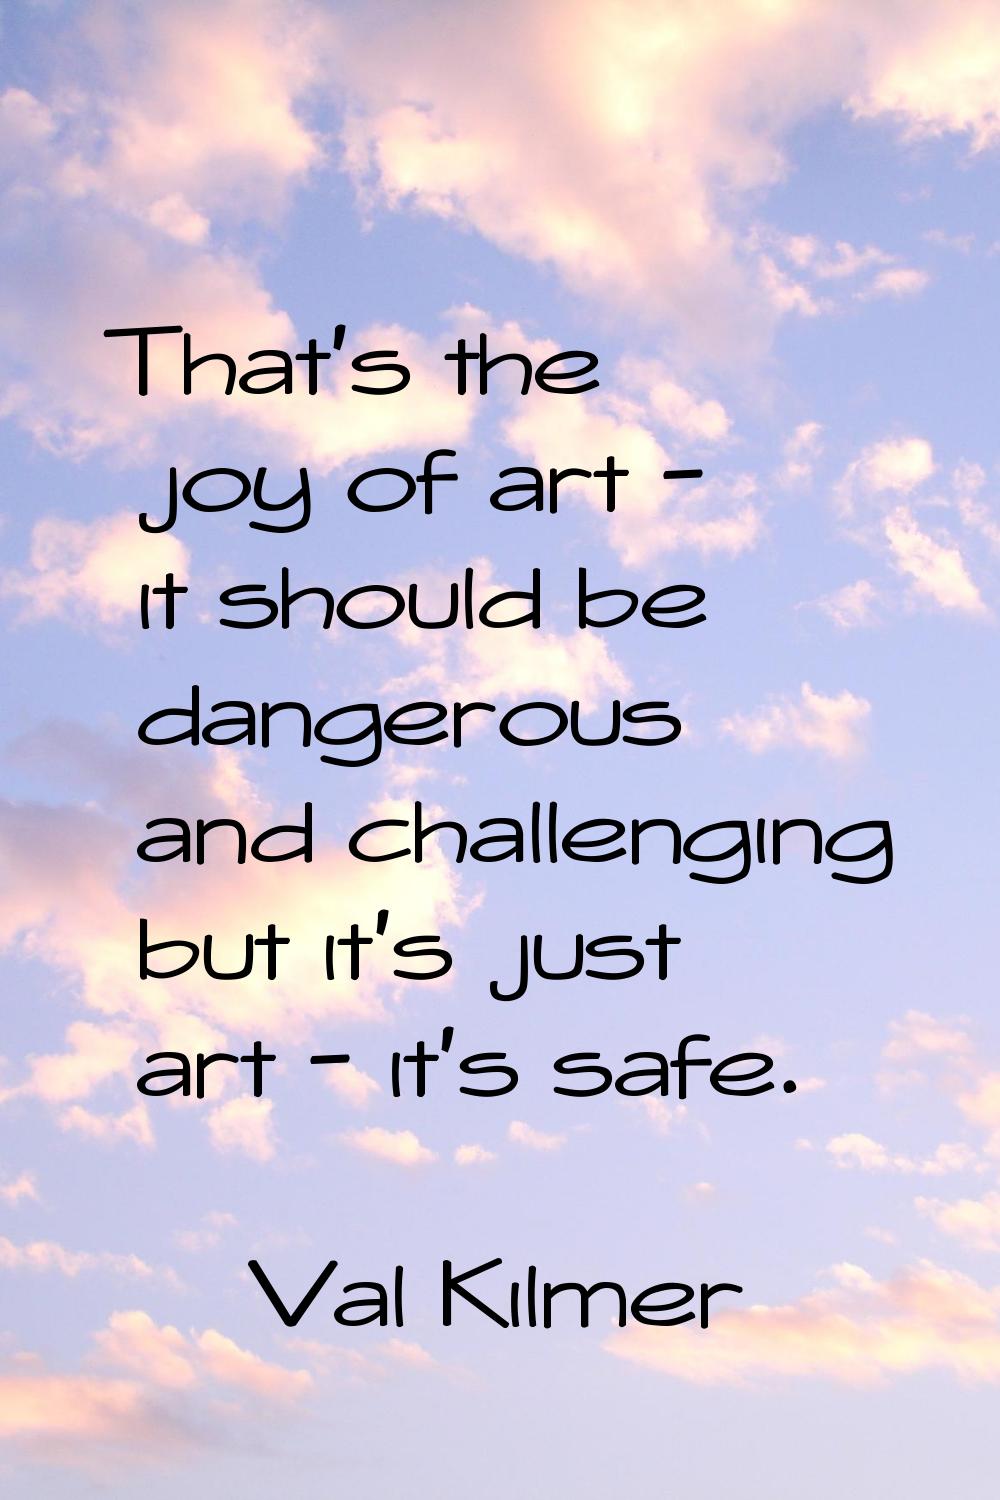 That's the joy of art - it should be dangerous and challenging but it's just art - it's safe.